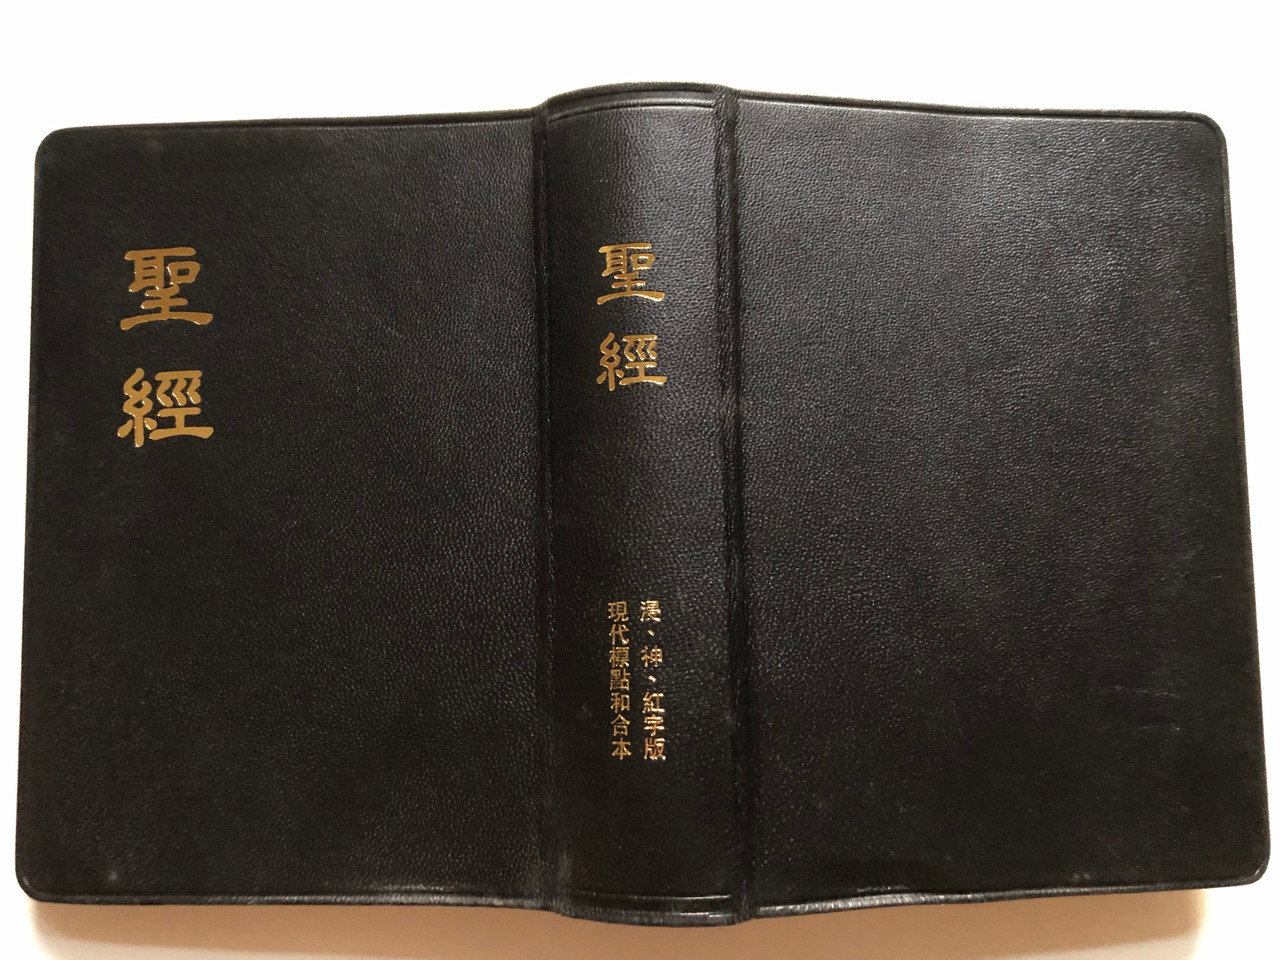 https://cdn10.bigcommerce.com/s-62bdpkt7pb/products/50656/images/258348/The_Holy_Bible_in_Chinese_13__20619.1668176018.1280.1280.JPG?c=2